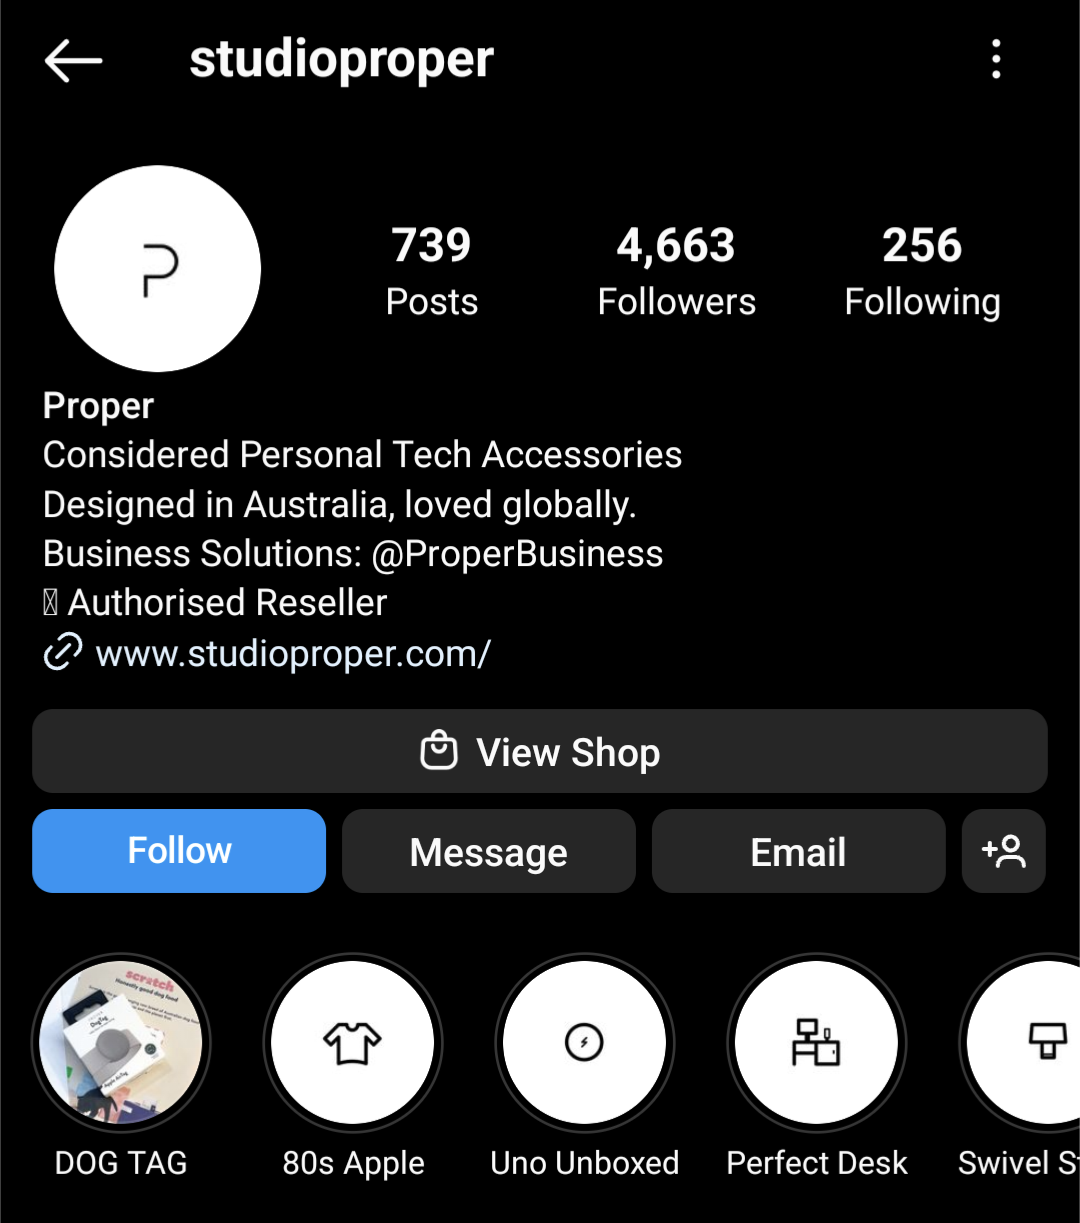 Studio Proper uses a white background on its stories in its Instagram bio